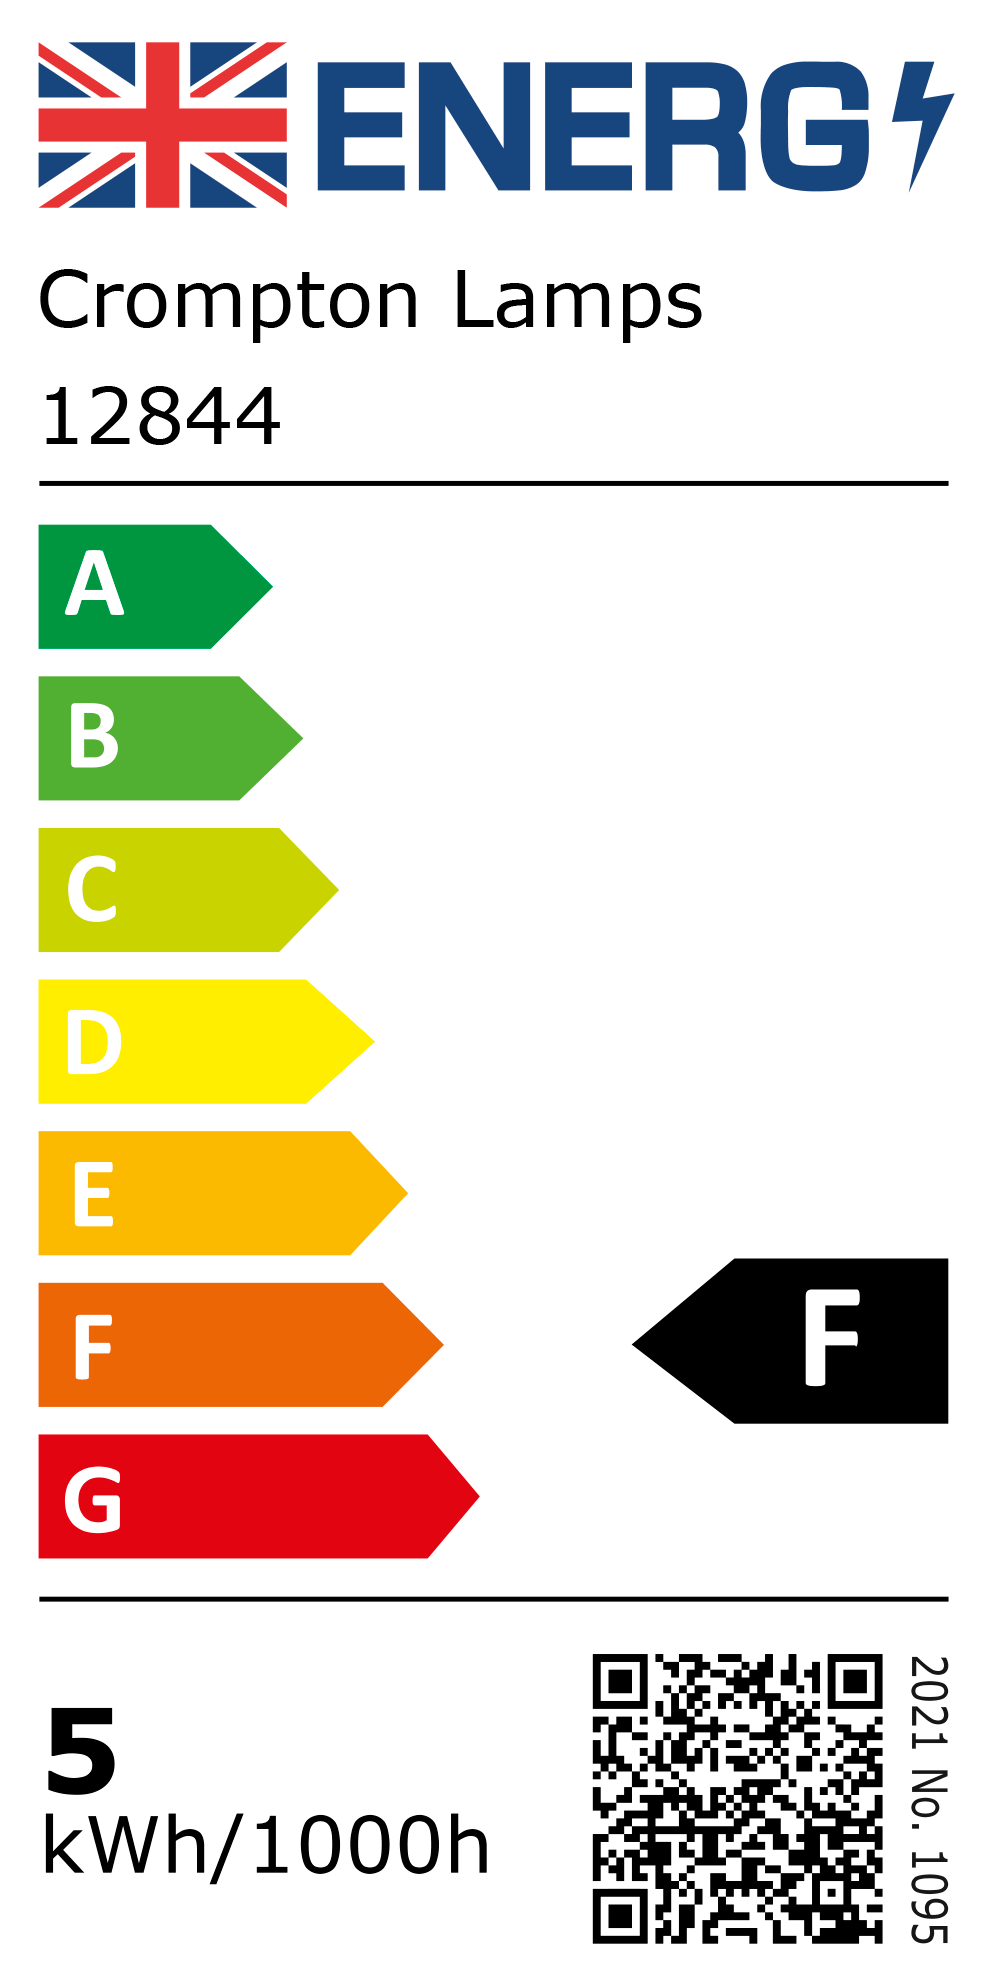 New 2021 Energy Rating Label: Stock Code 12844